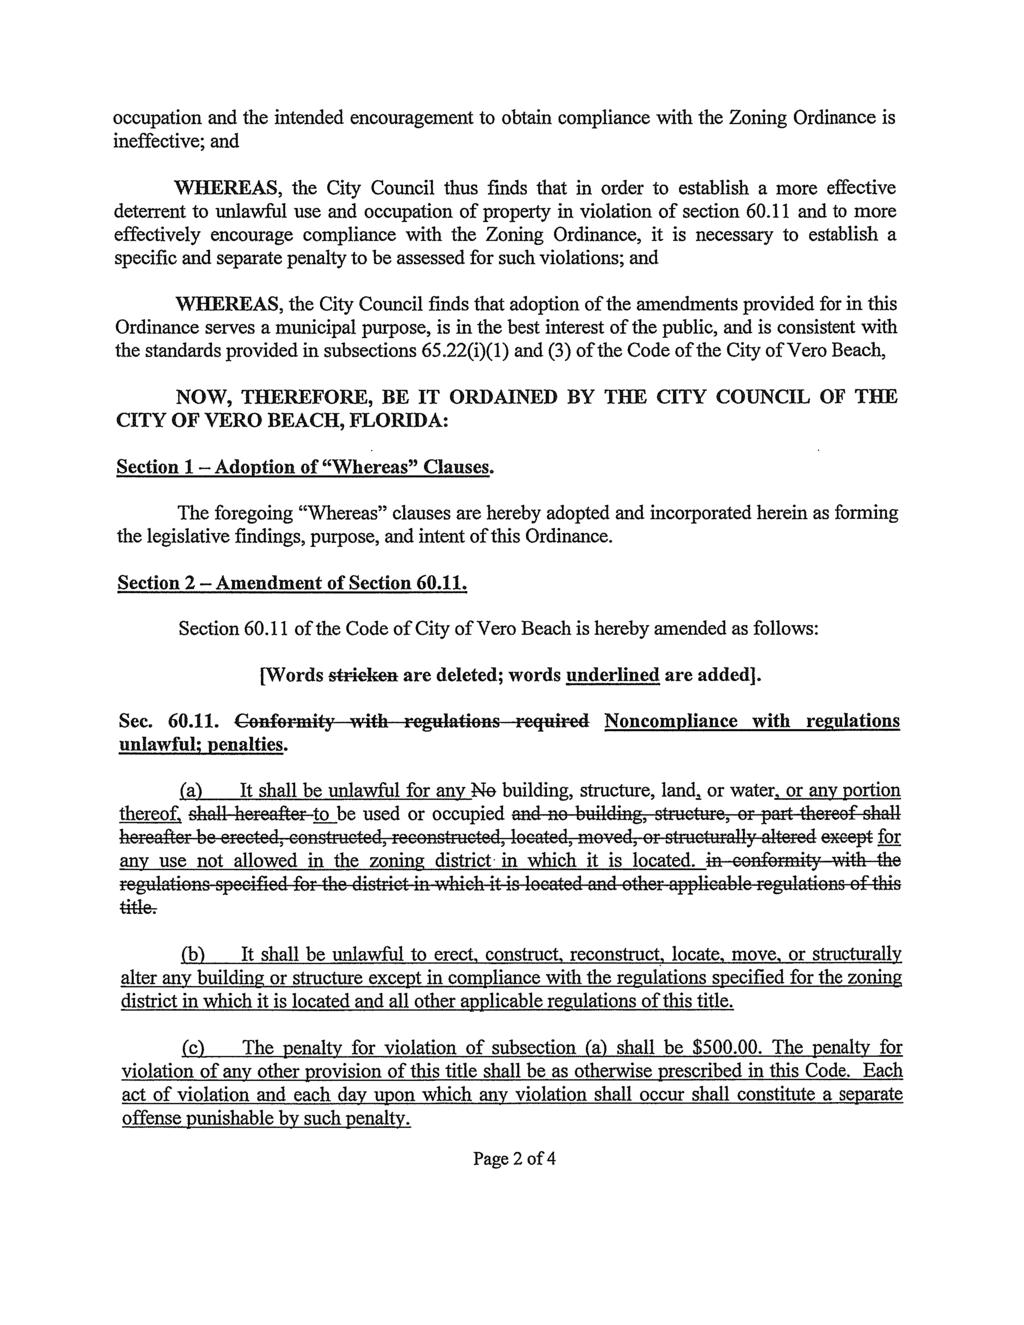 occupation and the intended encouragement to obtain compliance with the Zoning Ordinance is ineffective; and WHEREAS, the City Council thus finds that in order to establish a more effective deterrent